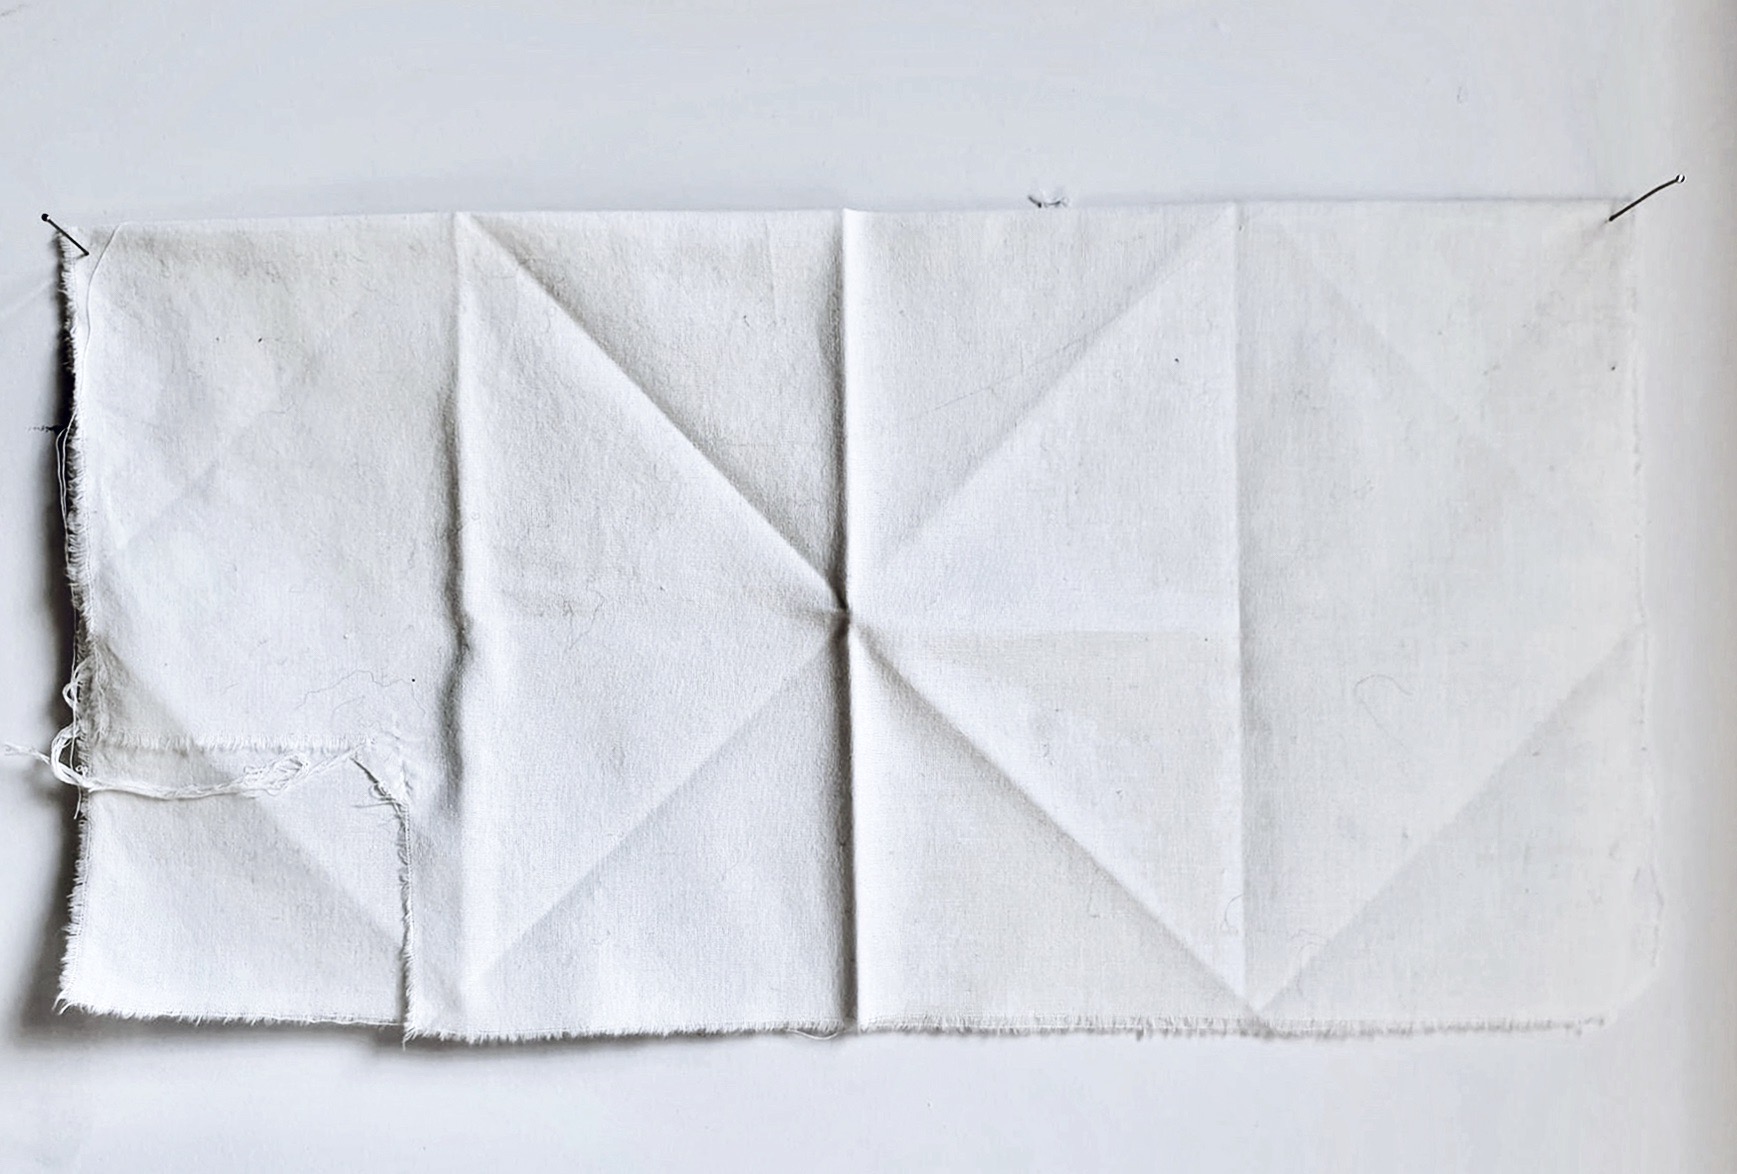 Piece of bed sheet, ironing, 40 x 15 cm